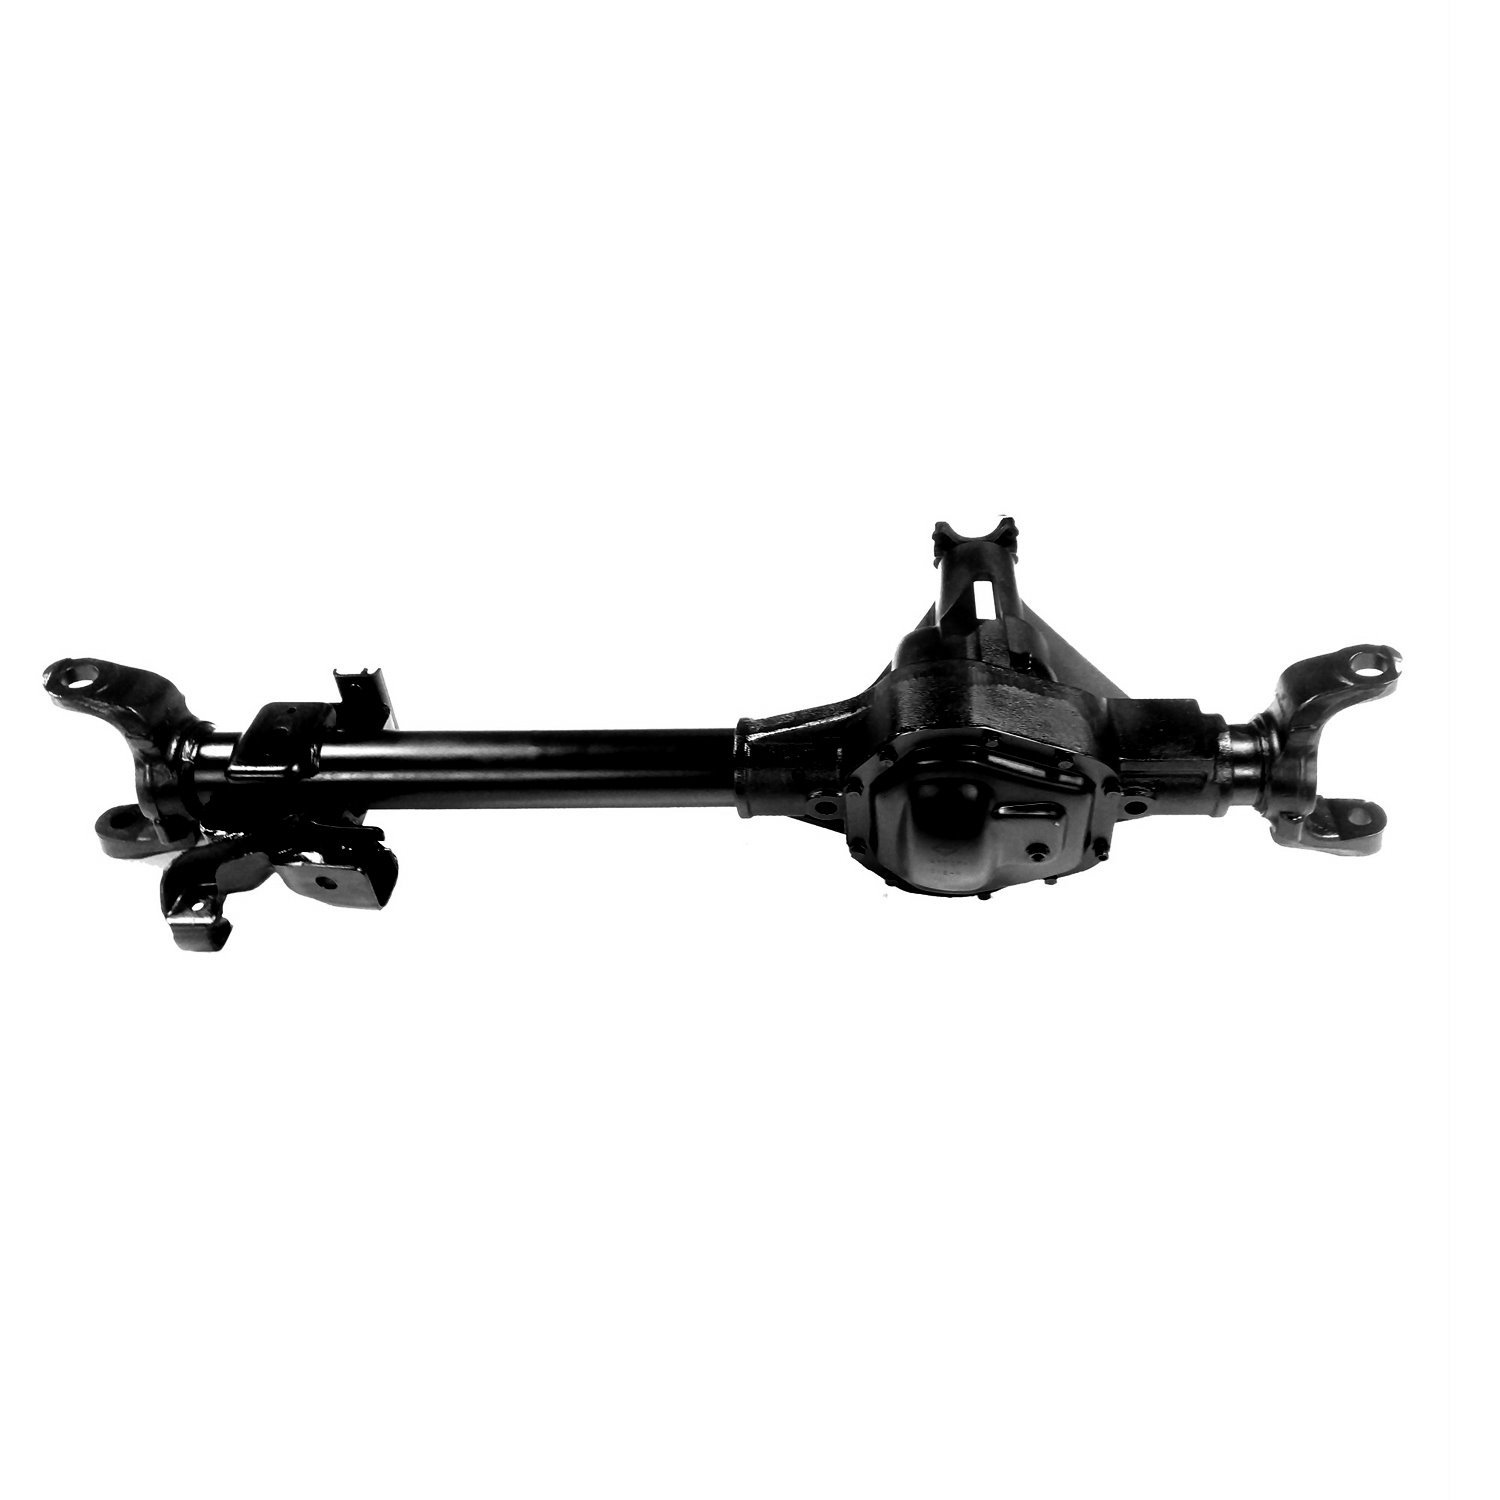 Remanufactured Complete Axle Assembly for Dana 60 99-00 Ford F350 4.30, DRW